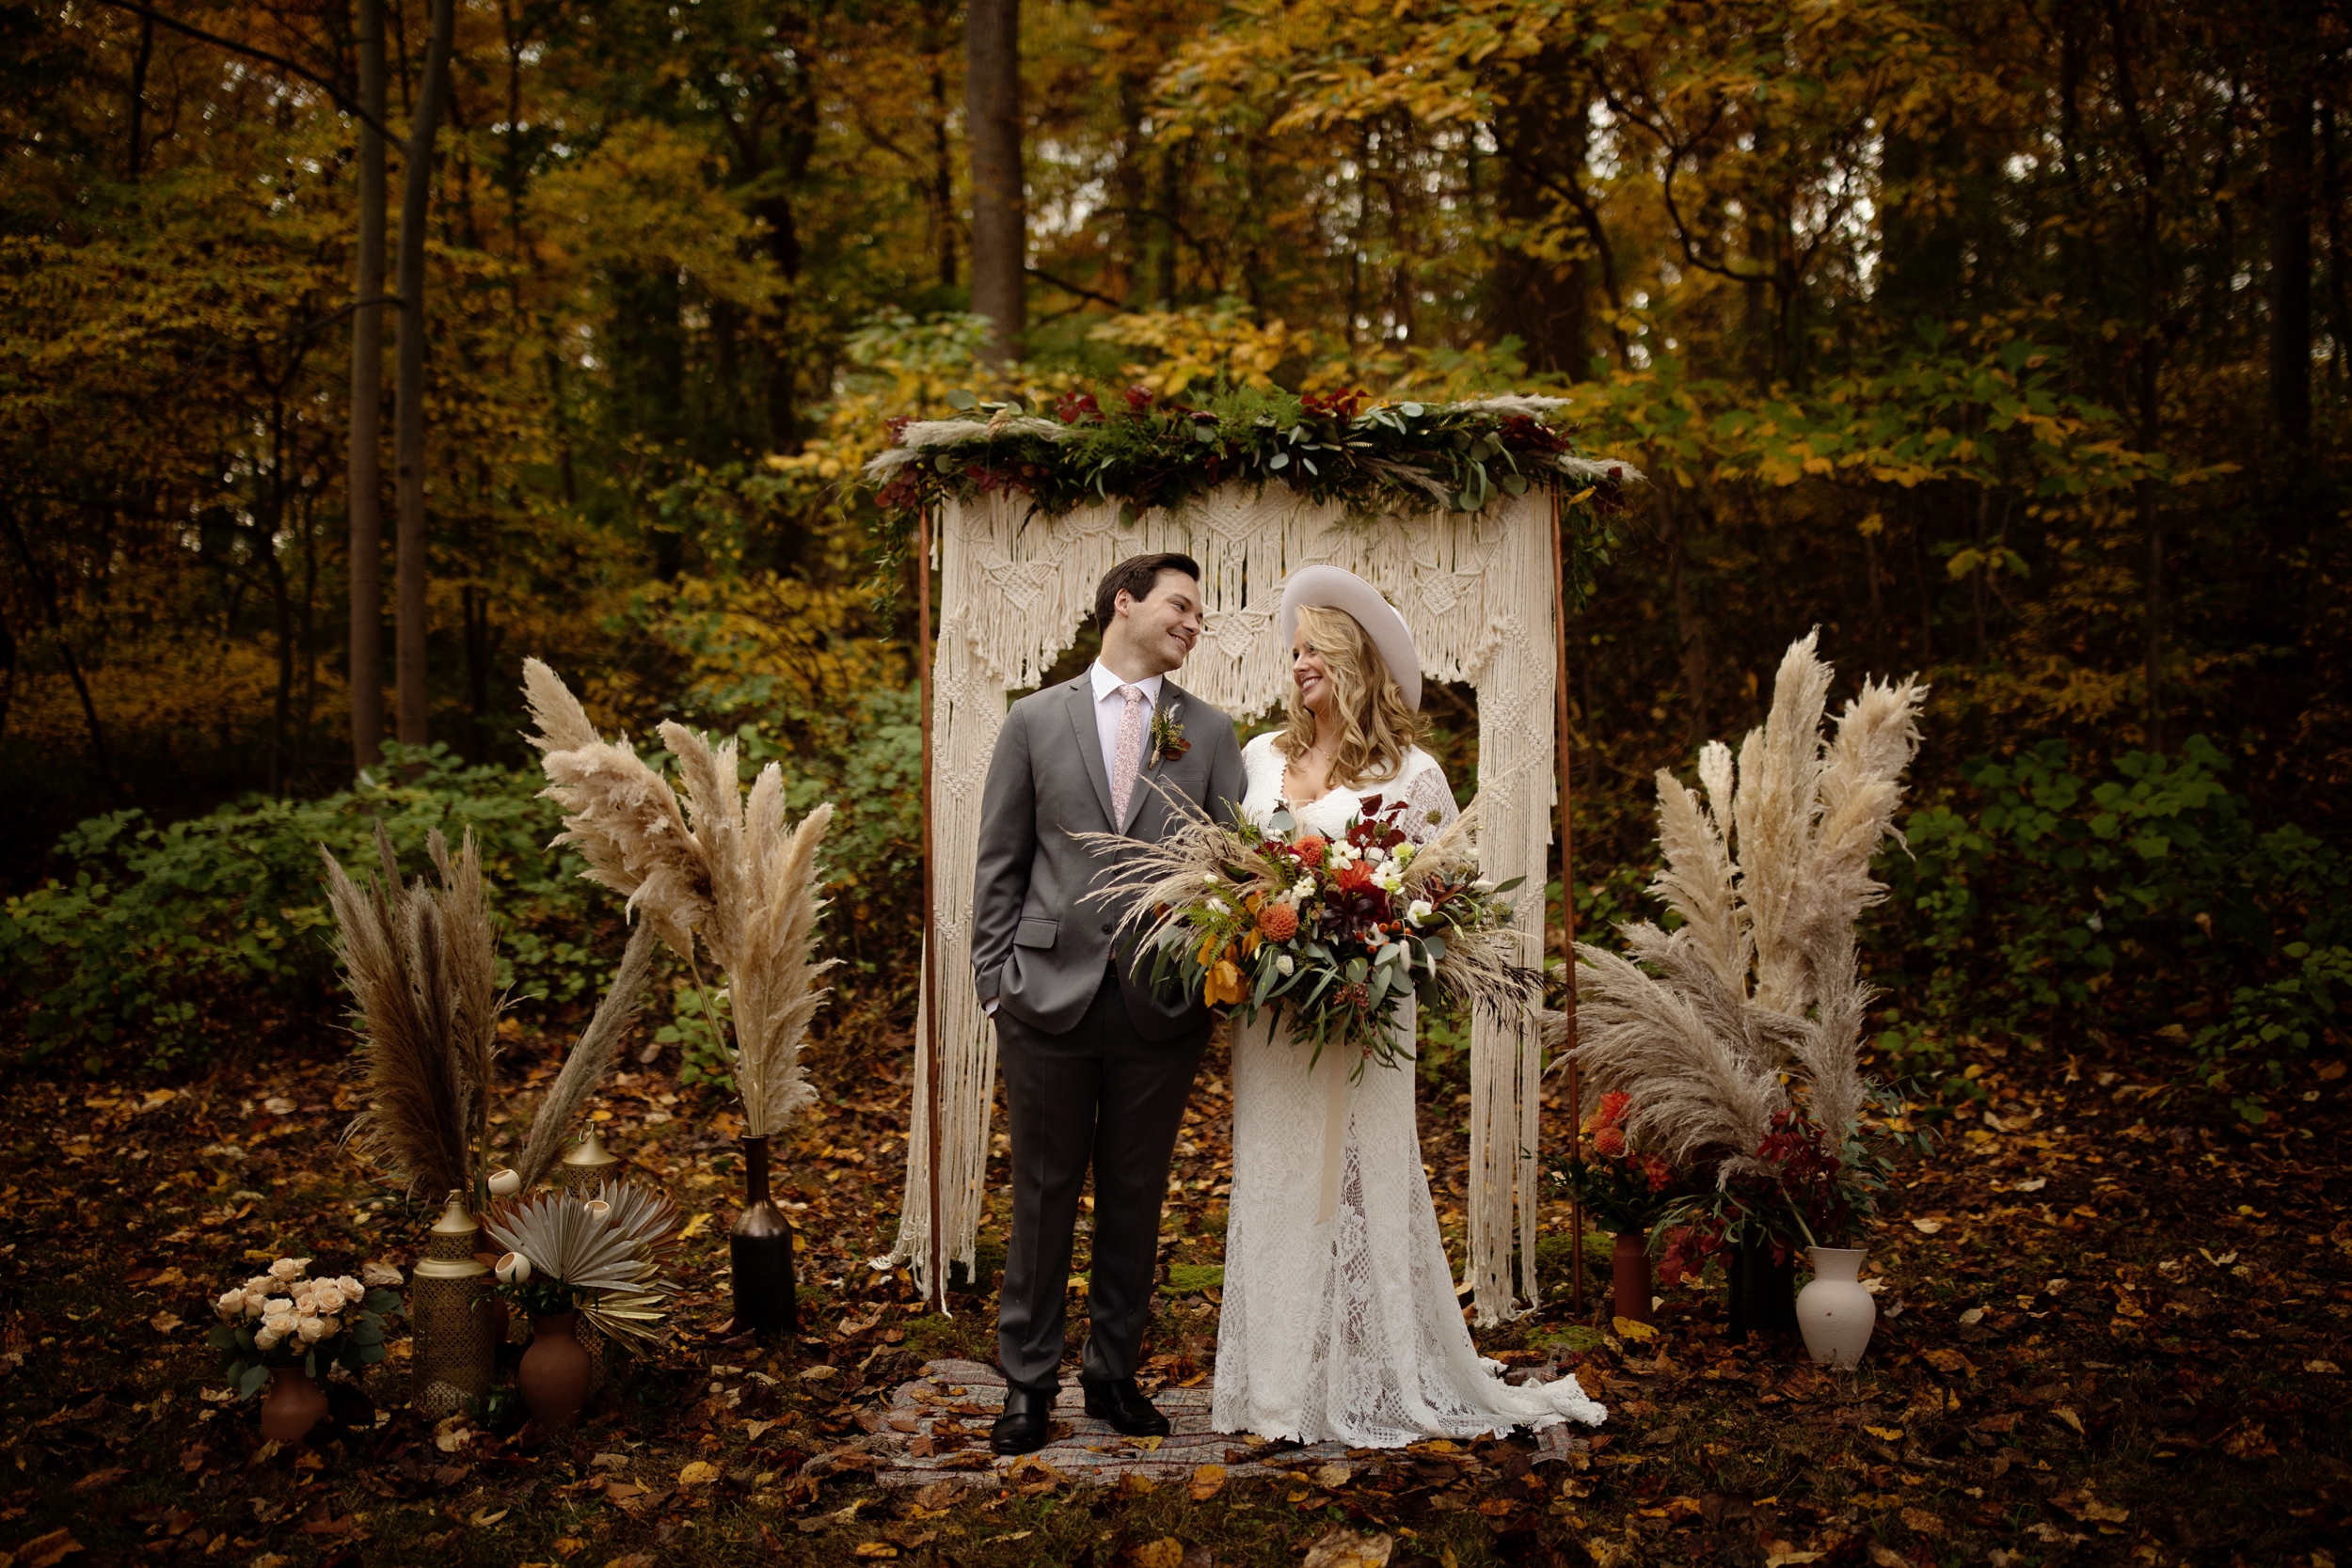 Boho Elopement at Hibernia Park in Coatsville, PA. macrame ceremony backdrop and whimsical, boho, dried florals. Bride is wearing a BHLD gown and a white hat.